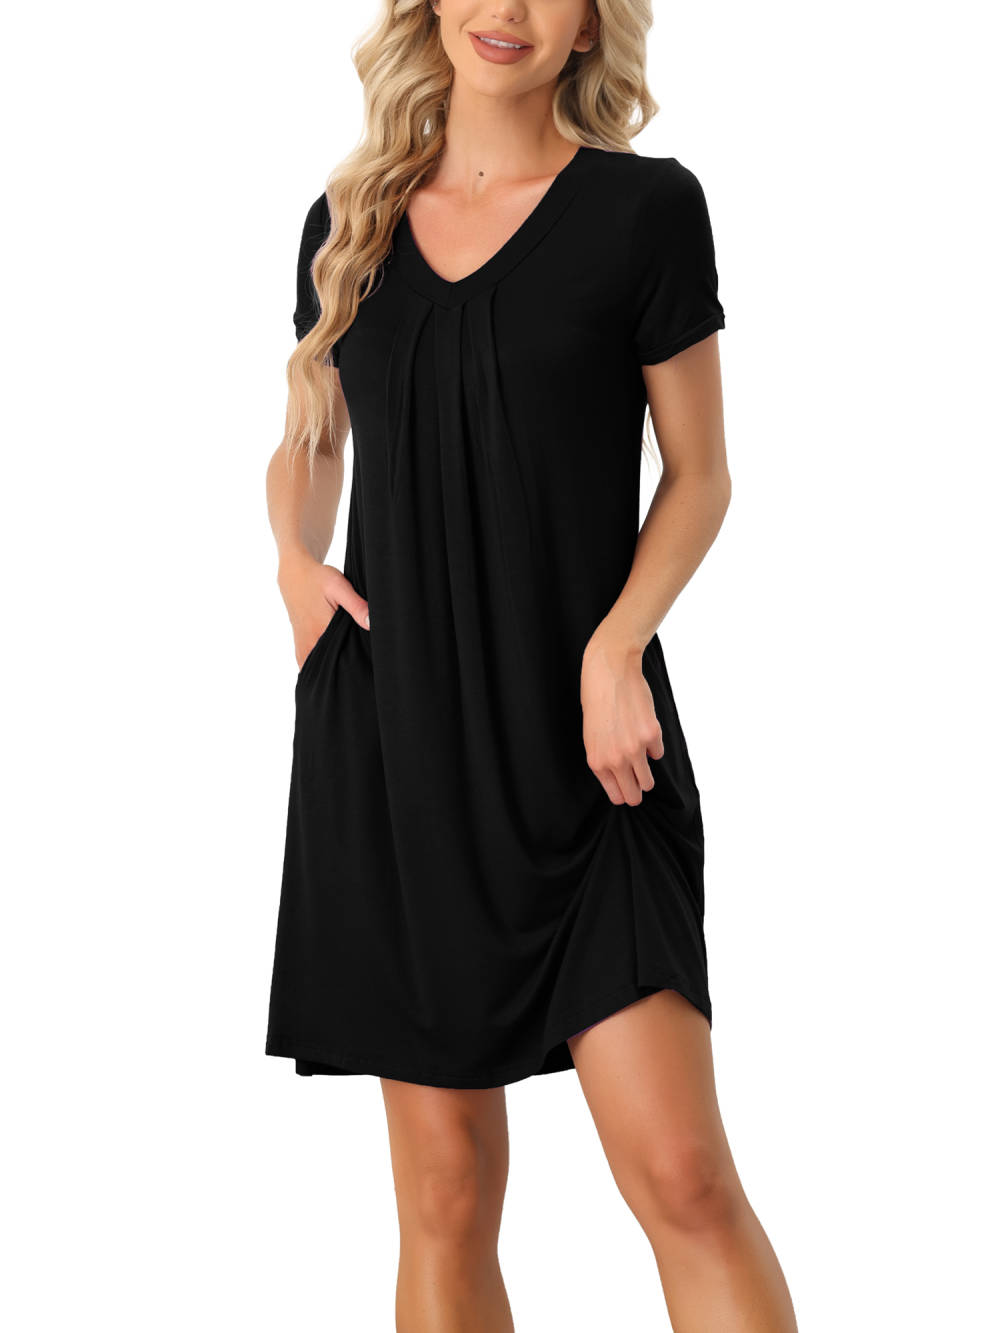 cheibear - Sleepwear V-Neck with Pockets Lounge Nightgown